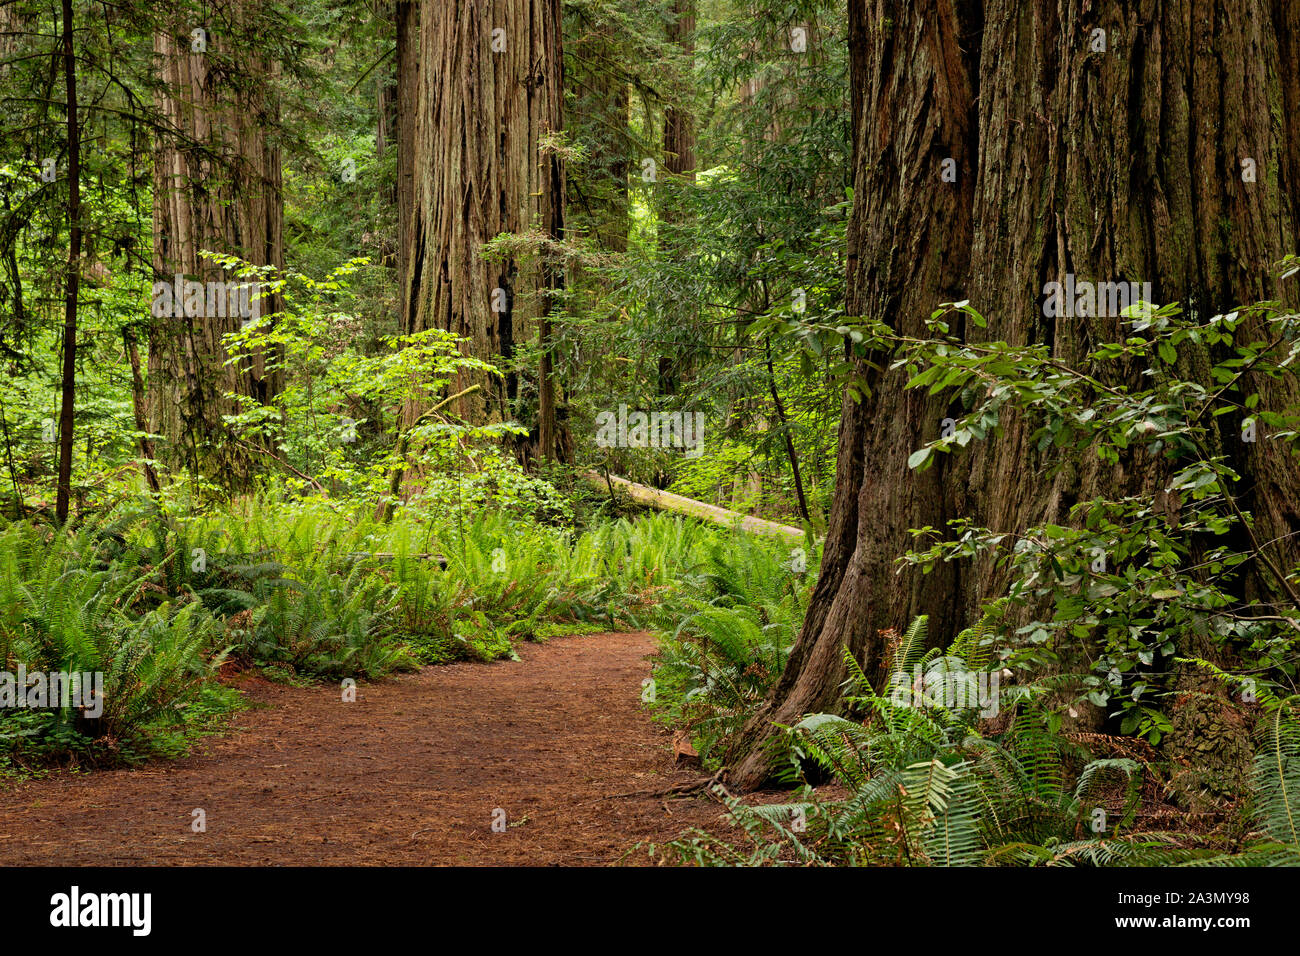 CA03629-00...CALIFORNIA - Loop trail through the redwood trees through Stout Grove in the Jedediah Smith Redwoods State Park. Stock Photo